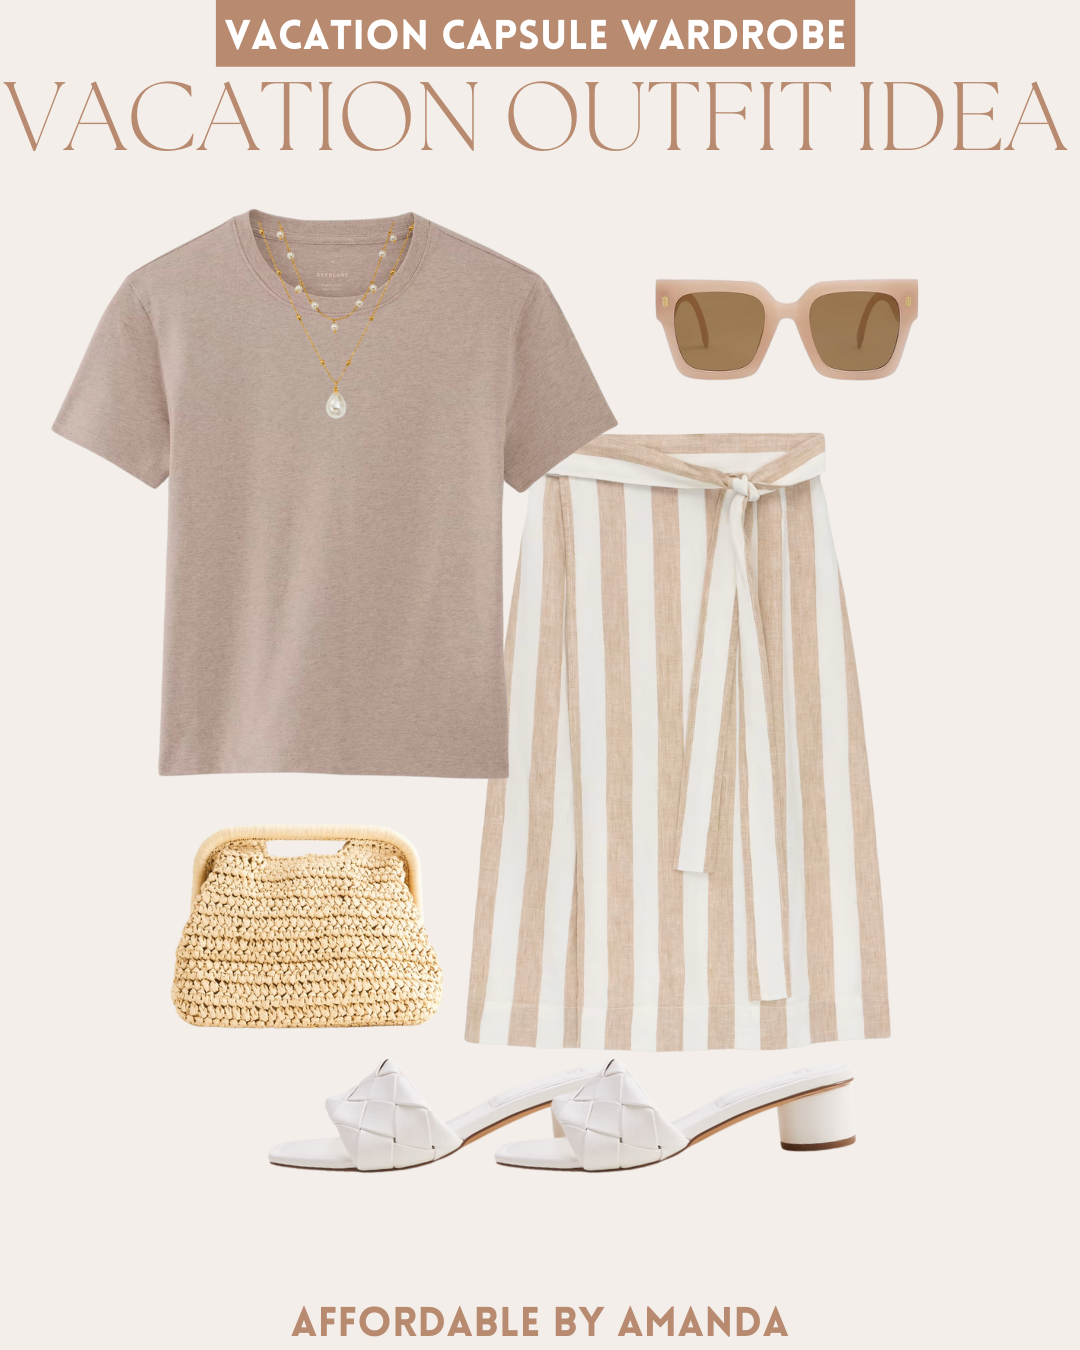 Carry-On Only Vacation Capsule Wardrobe 2024 - How to Create the Ultimate Beach Vacation Capsule Wardrobe - Resort Wear Outfit Ideas